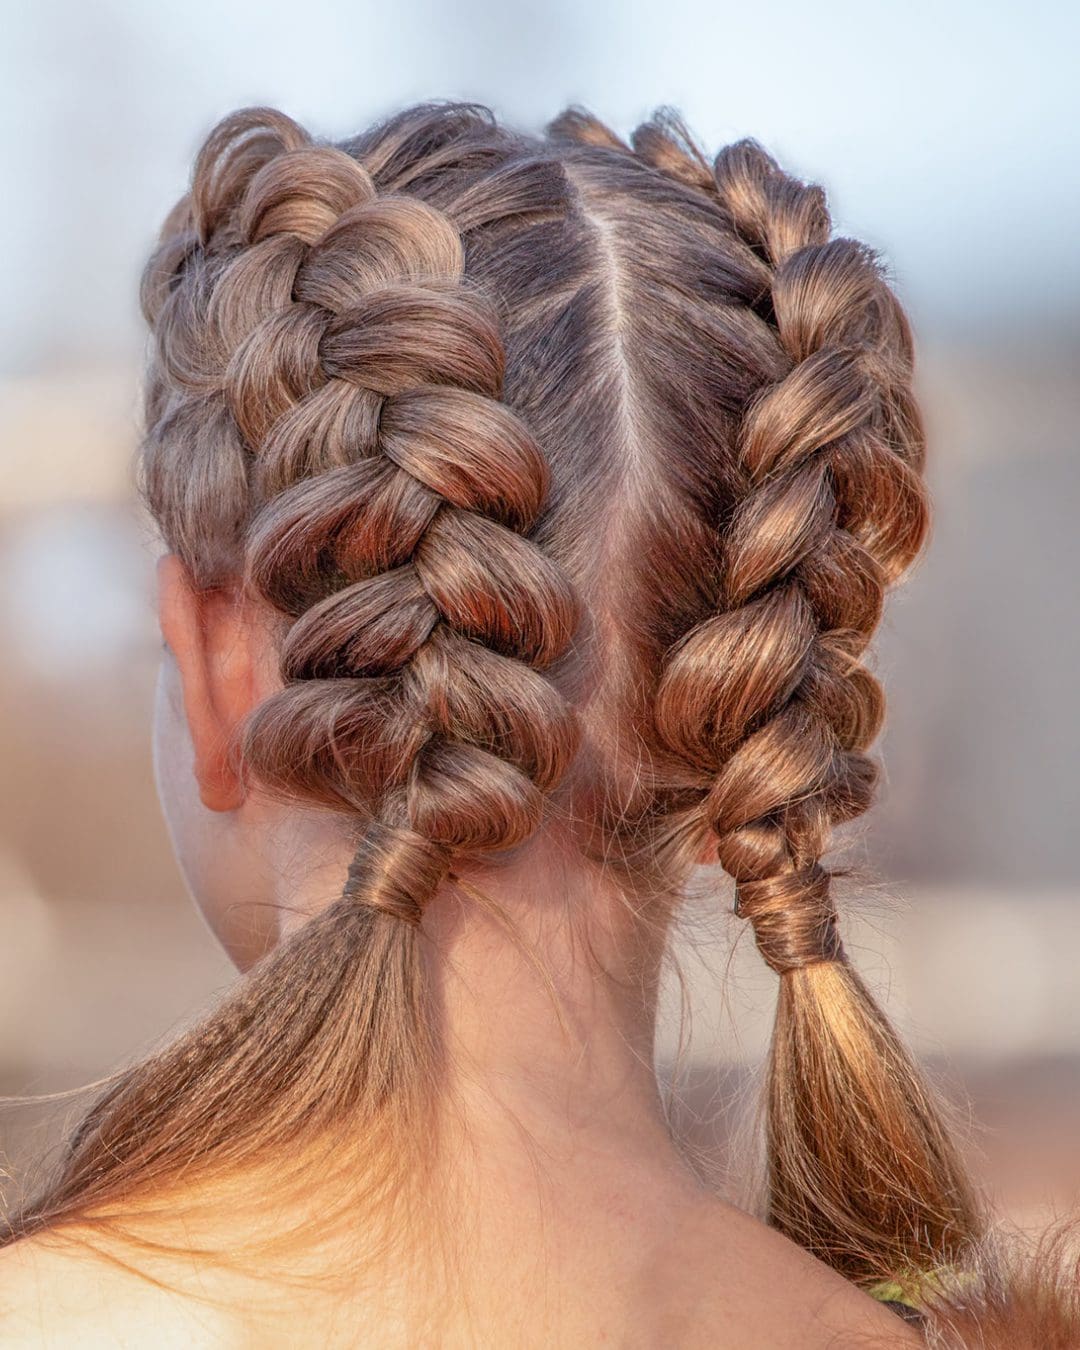 7 Hairstyles for Long, Curly Hair |